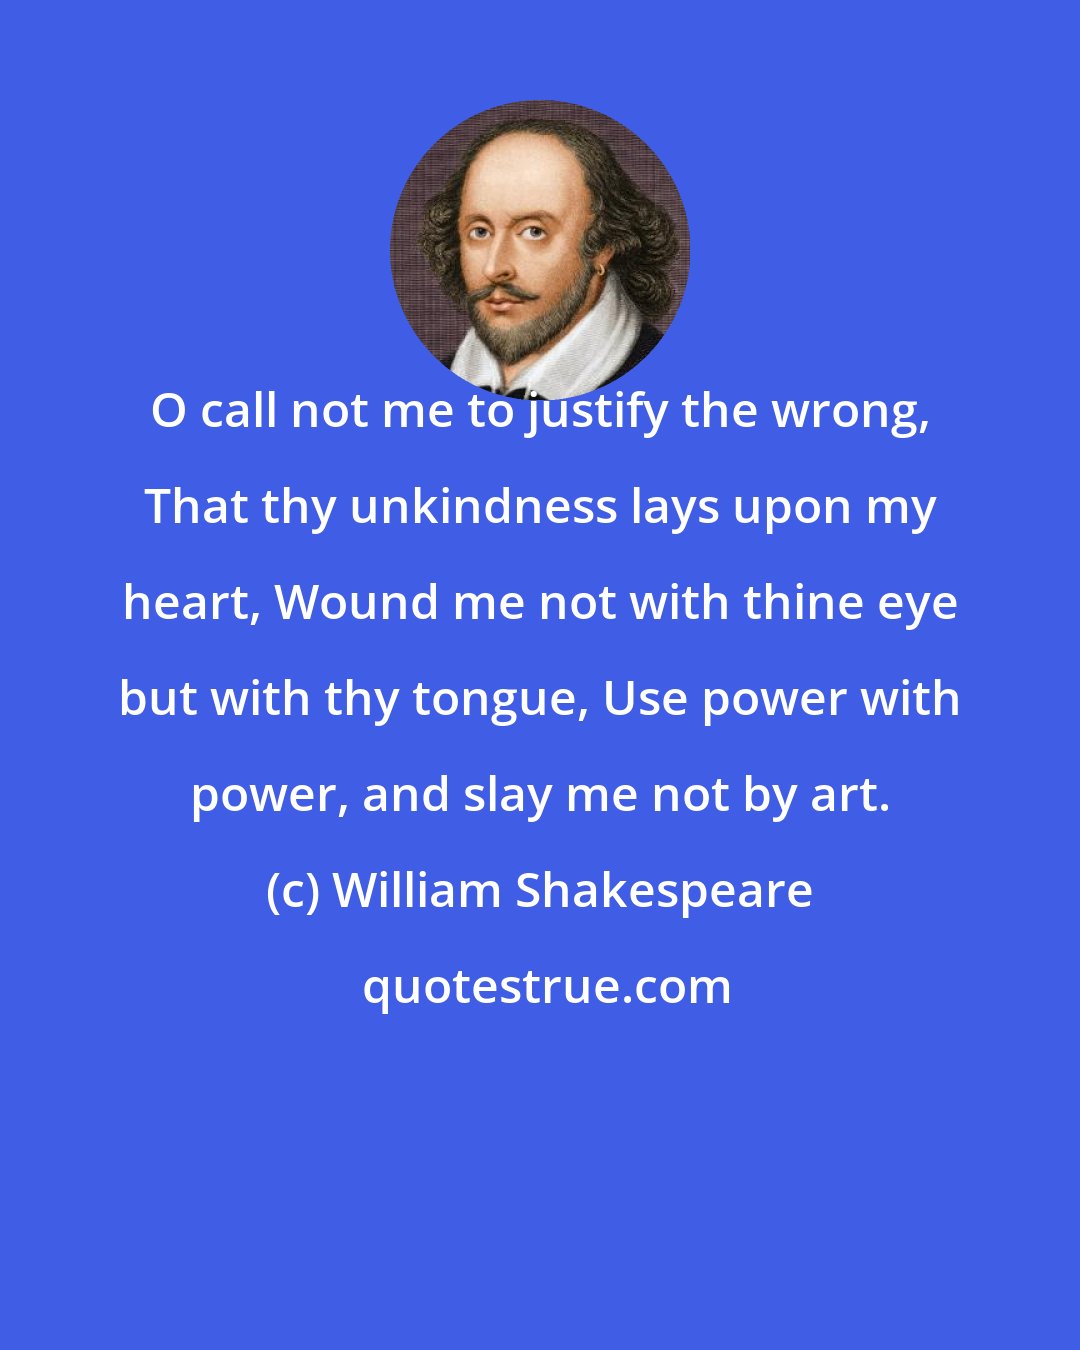 William Shakespeare: O call not me to justify the wrong, That thy unkindness lays upon my heart, Wound me not with thine eye but with thy tongue, Use power with power, and slay me not by art.